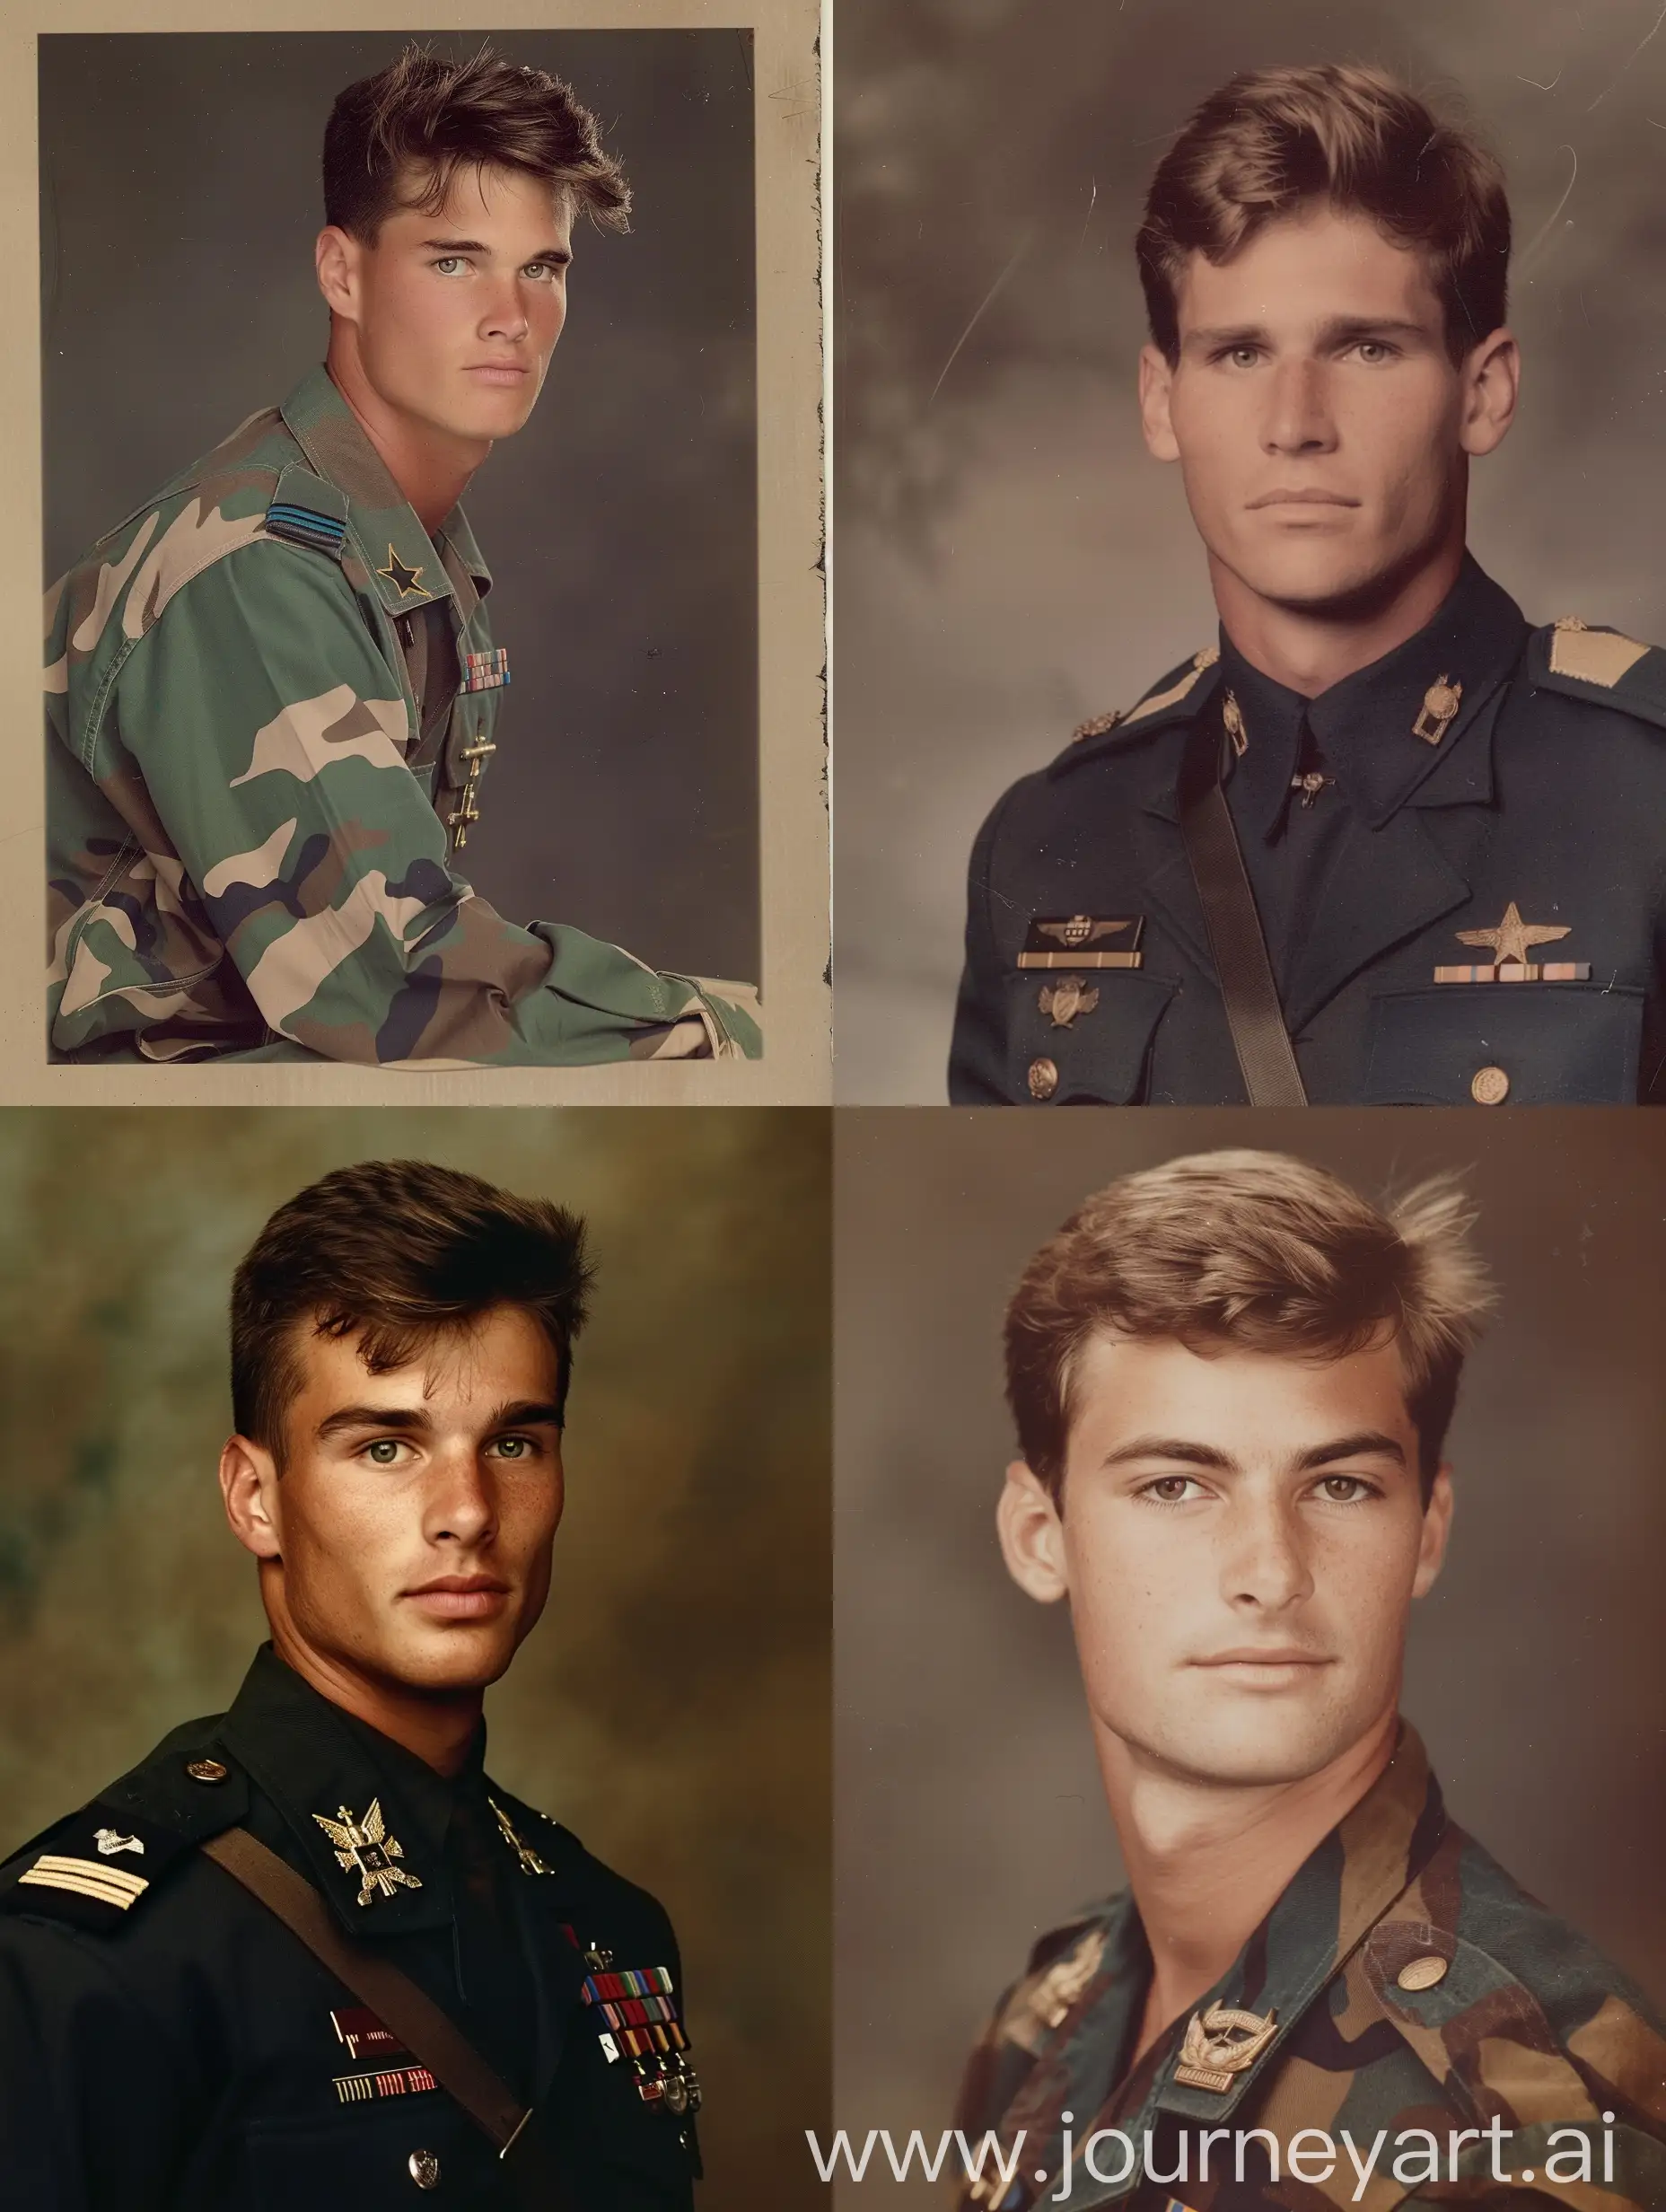 90's Yearbook Photo of a male military cadet